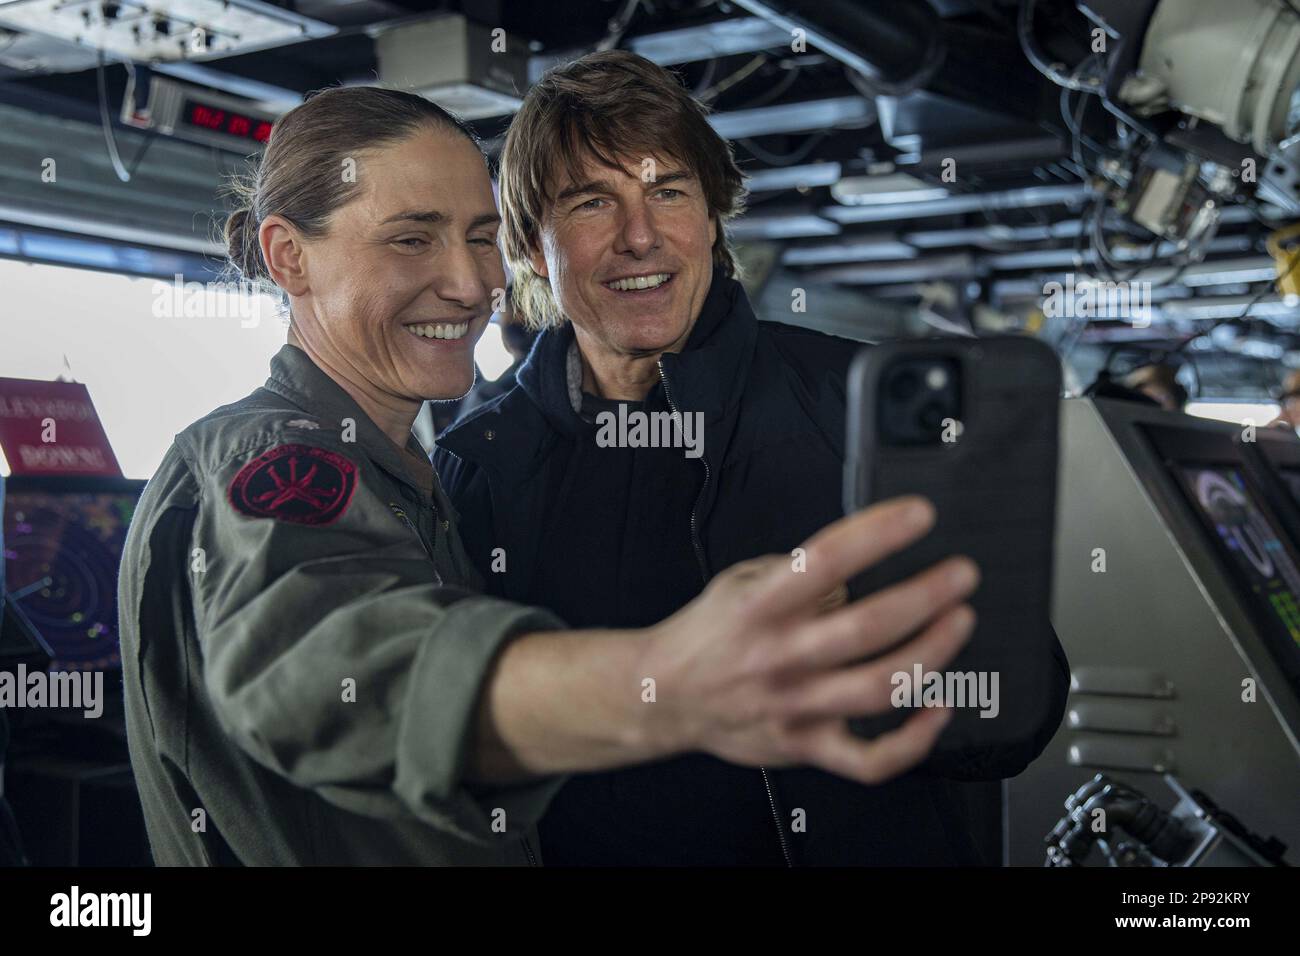 Cmdr. Karrie Lang, Combat Systems Officer aboard the Nimitz-class aircraft carrier USS George H. W. Bush (CVN 77), takes a selfie with Tom Cruise during a visit to the ship, on March 3, 2023, while filming scenes for 'Mission: Impossible - Dead Reckoning Part Two.' The George H.W. Bush Carrier Strike Group is on a scheduled deployment in the U.S. Naval Forces Europe area of operations, employed by U.S. Sixth Fleet to defend U.S., allied and partner interests. Photo by MC3 Samuel Wagner/U.S. Navy/UPI Stock Photo